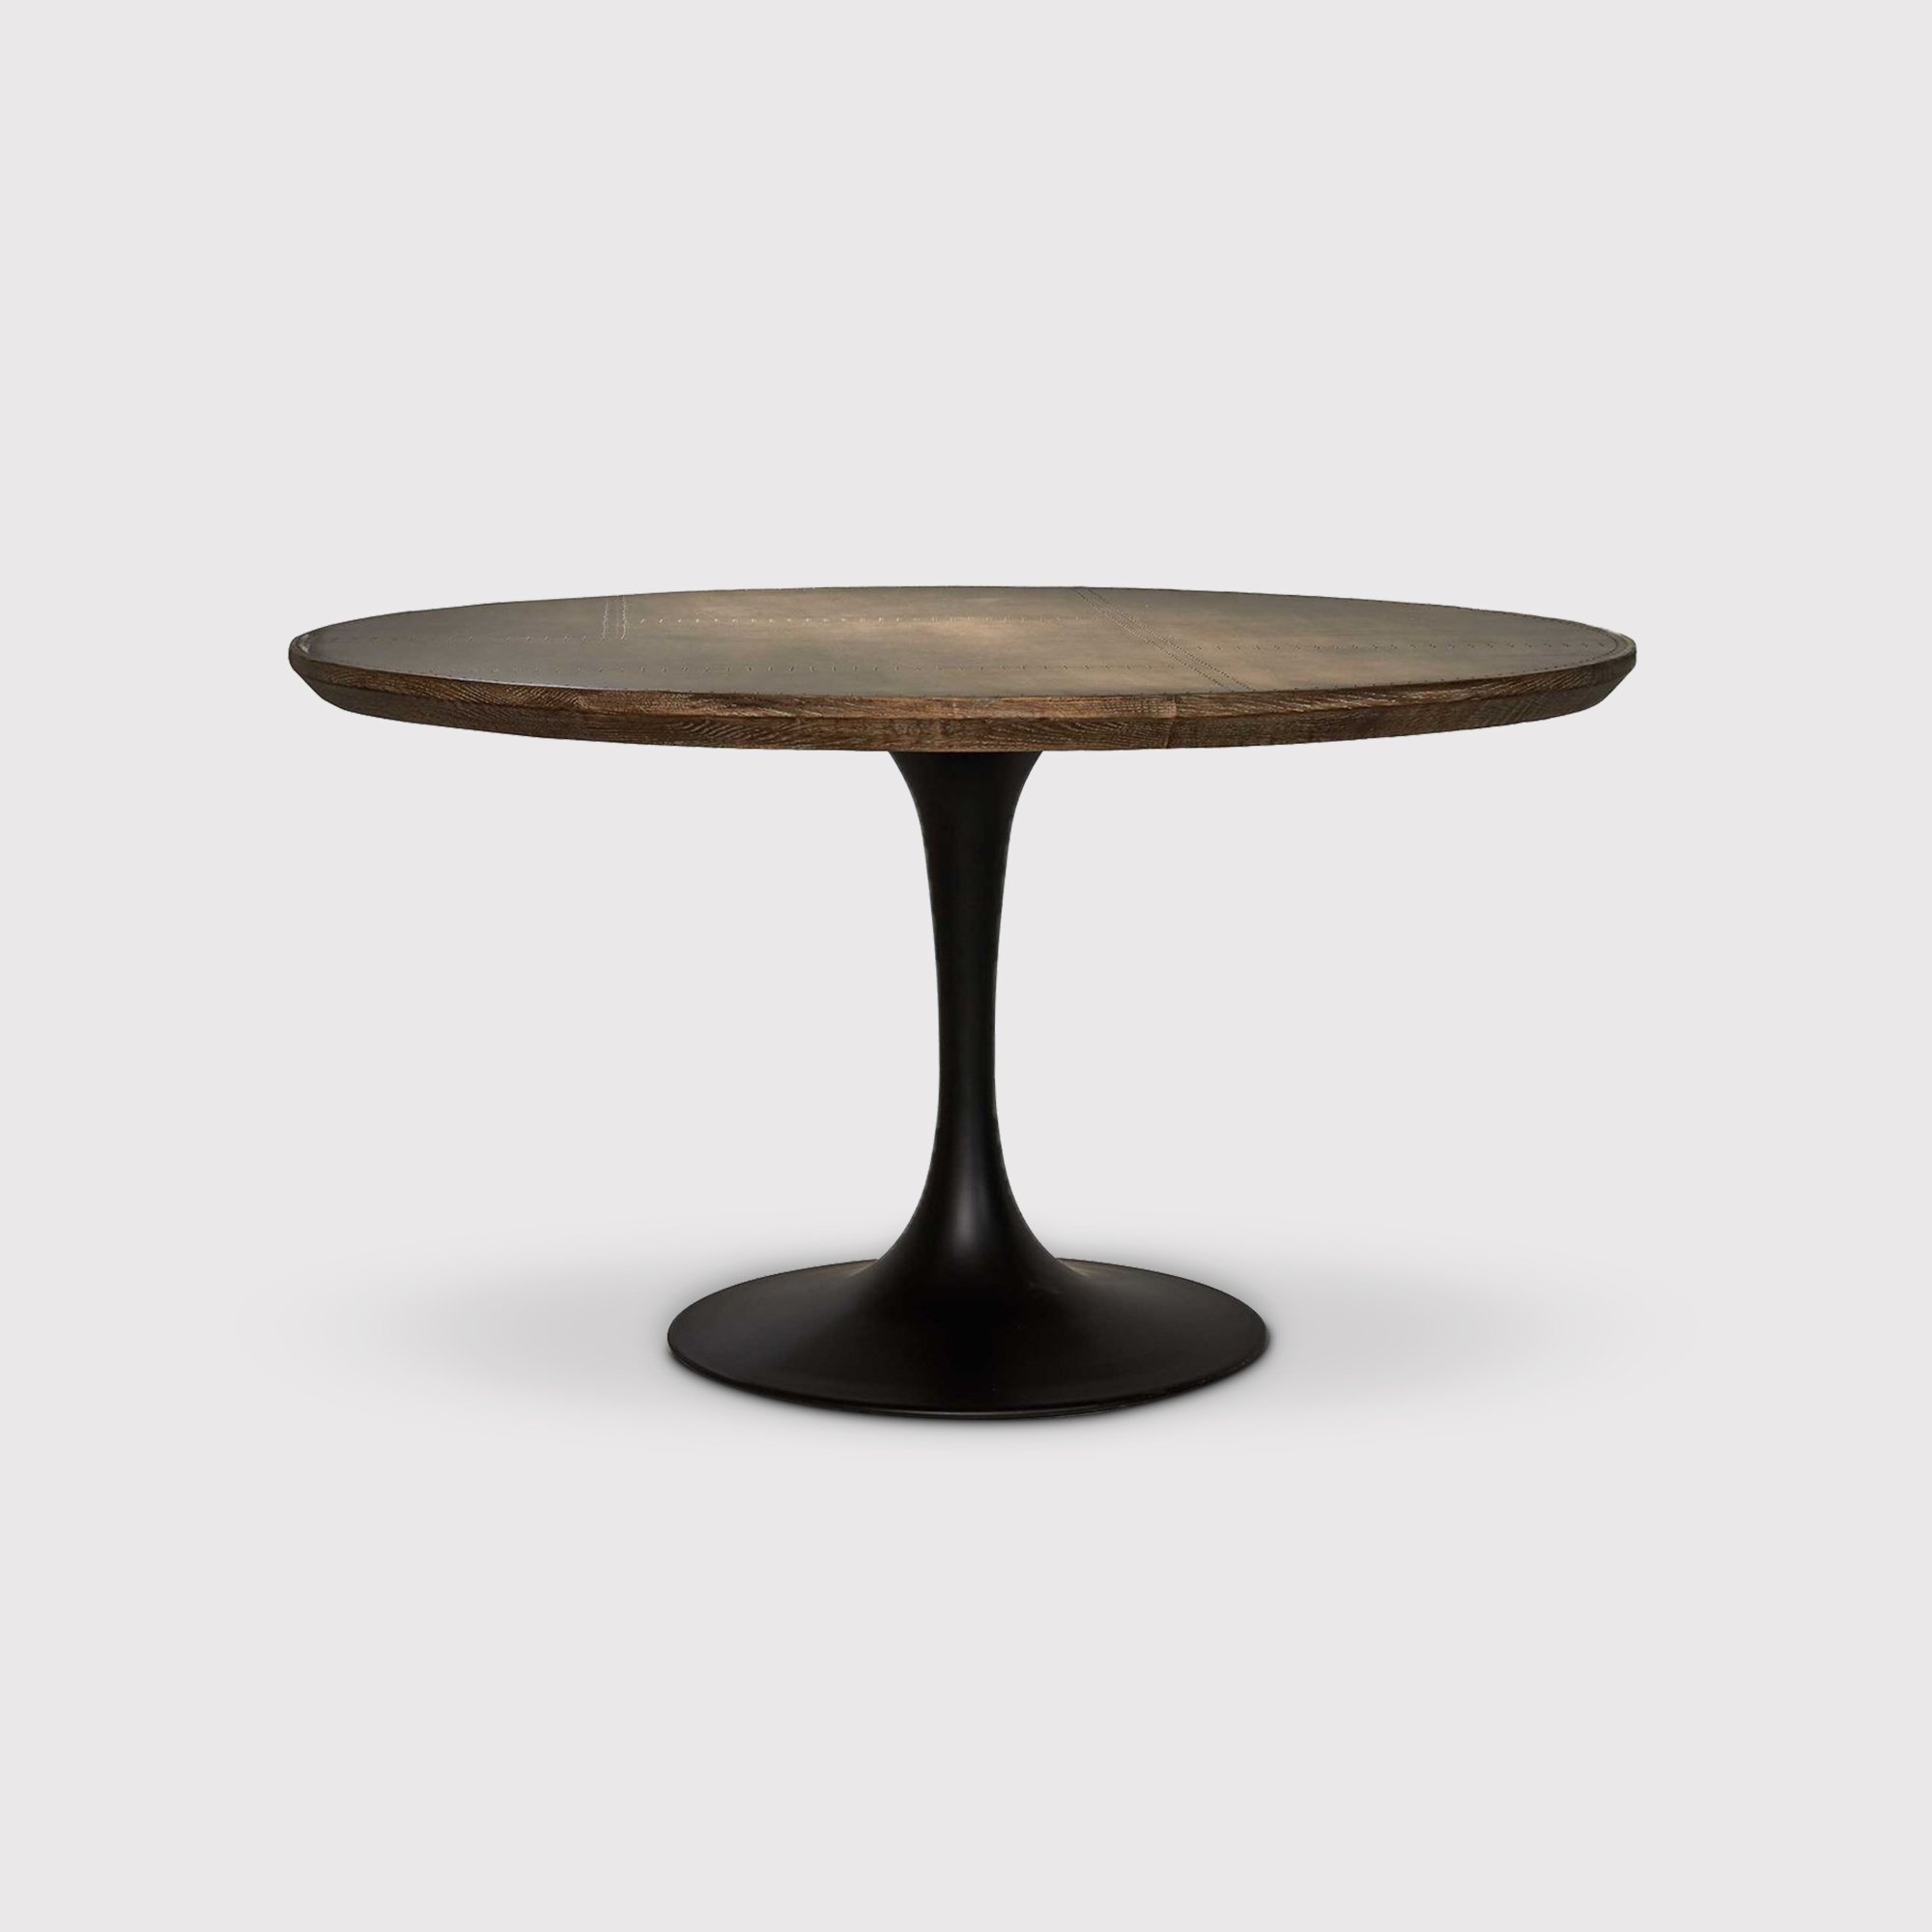 Talula Tulip Dining Table With Brass Top 140x76cm, Brown | Barker & Stonehouse